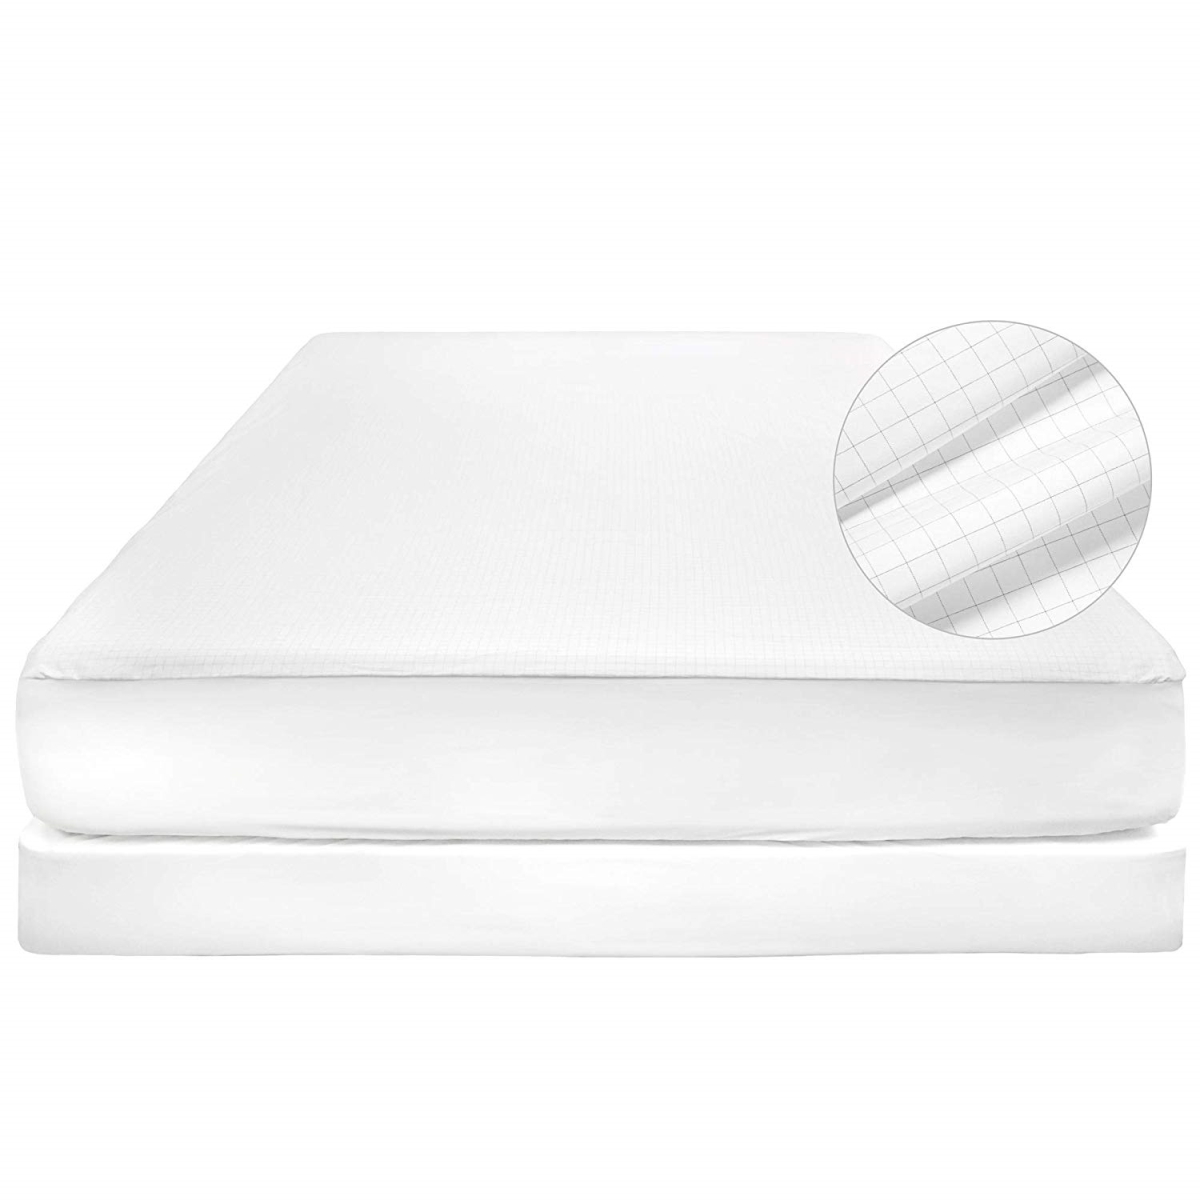 733394 Sleep Solutions By Carbon-infused Waterproof Mattress Protector, White - Double Size